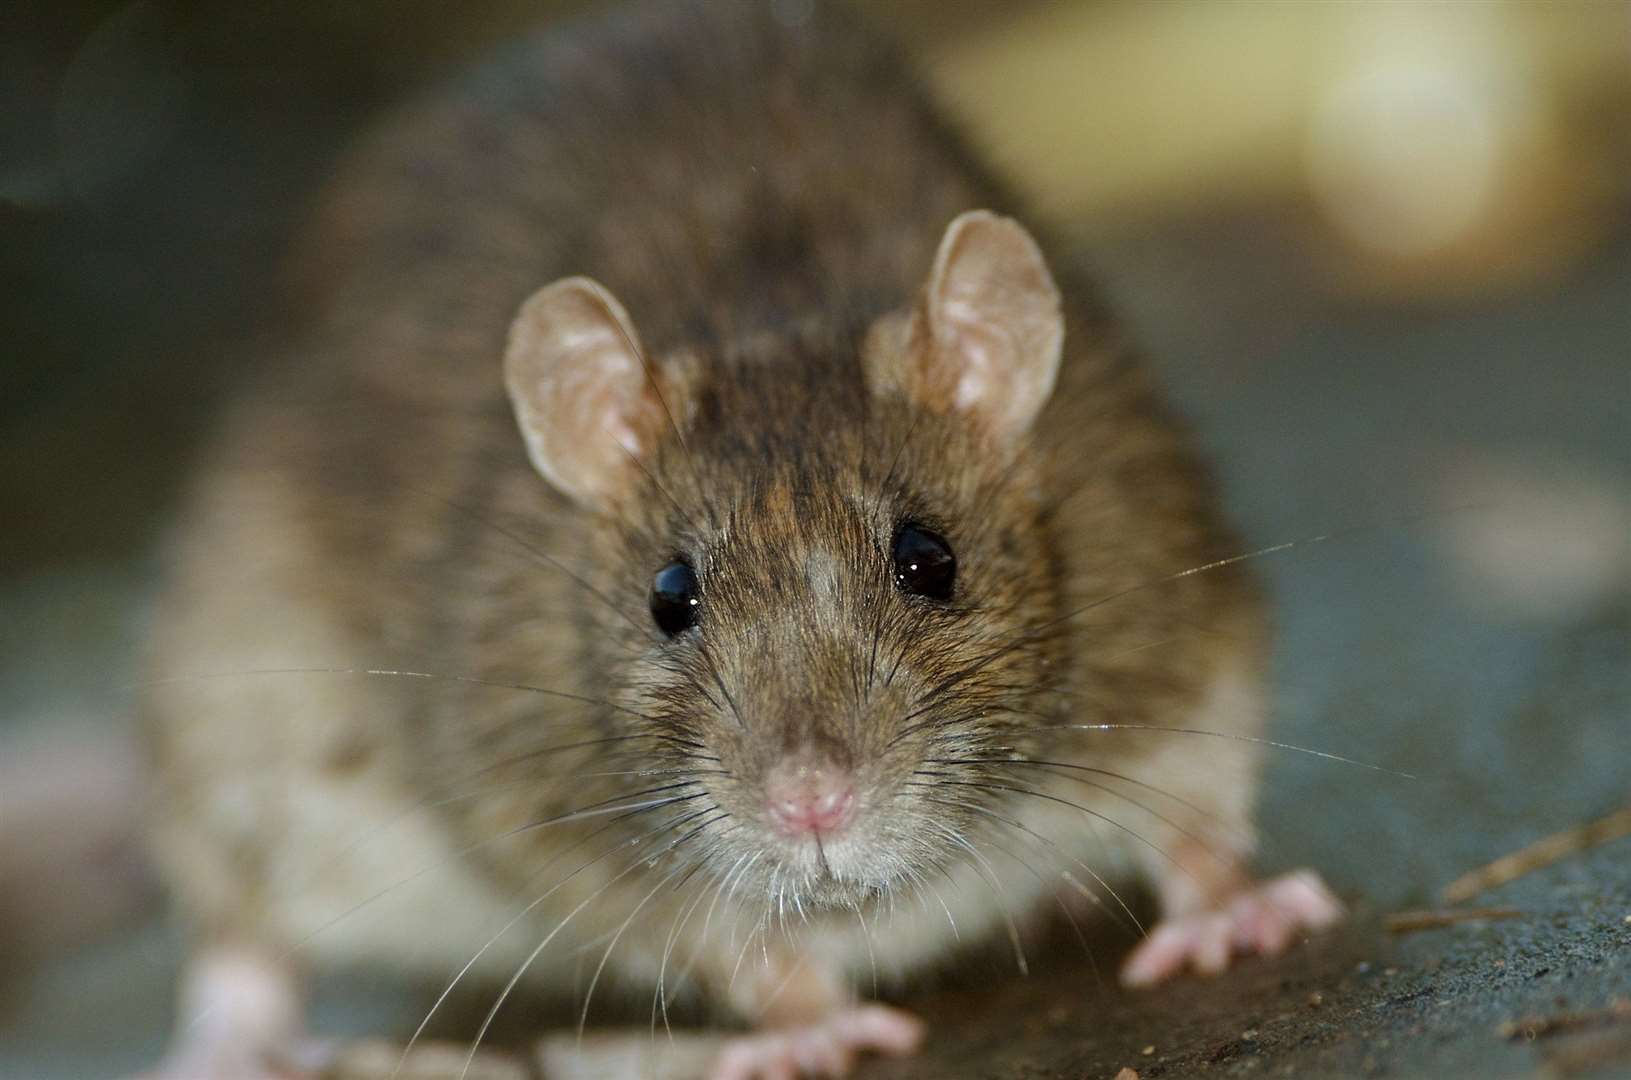 The garden was said to be infested with rats. Stock image